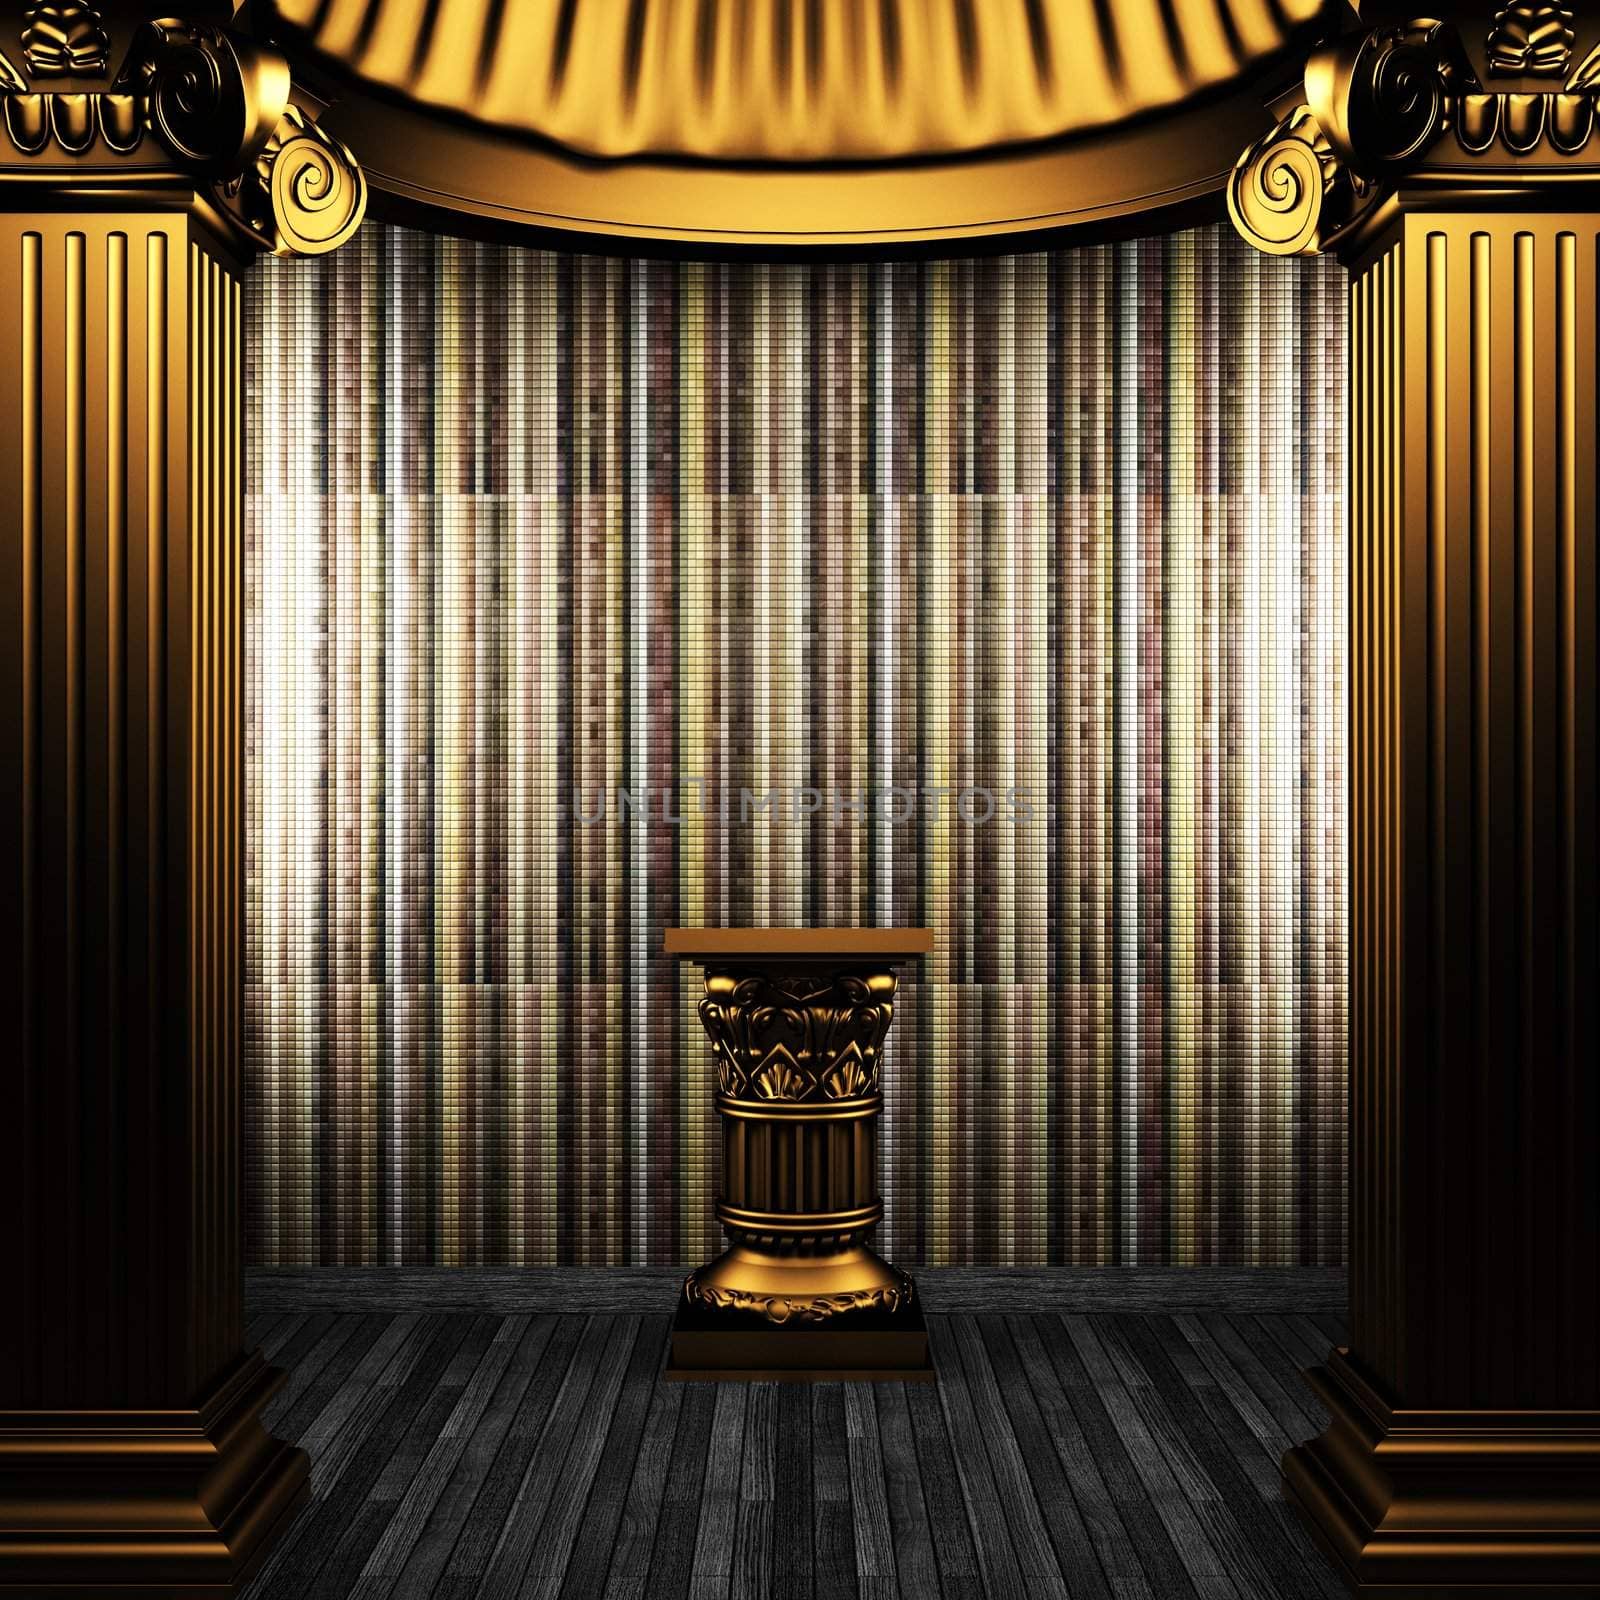 bronze columns, pedestal and tile wall made in 3D